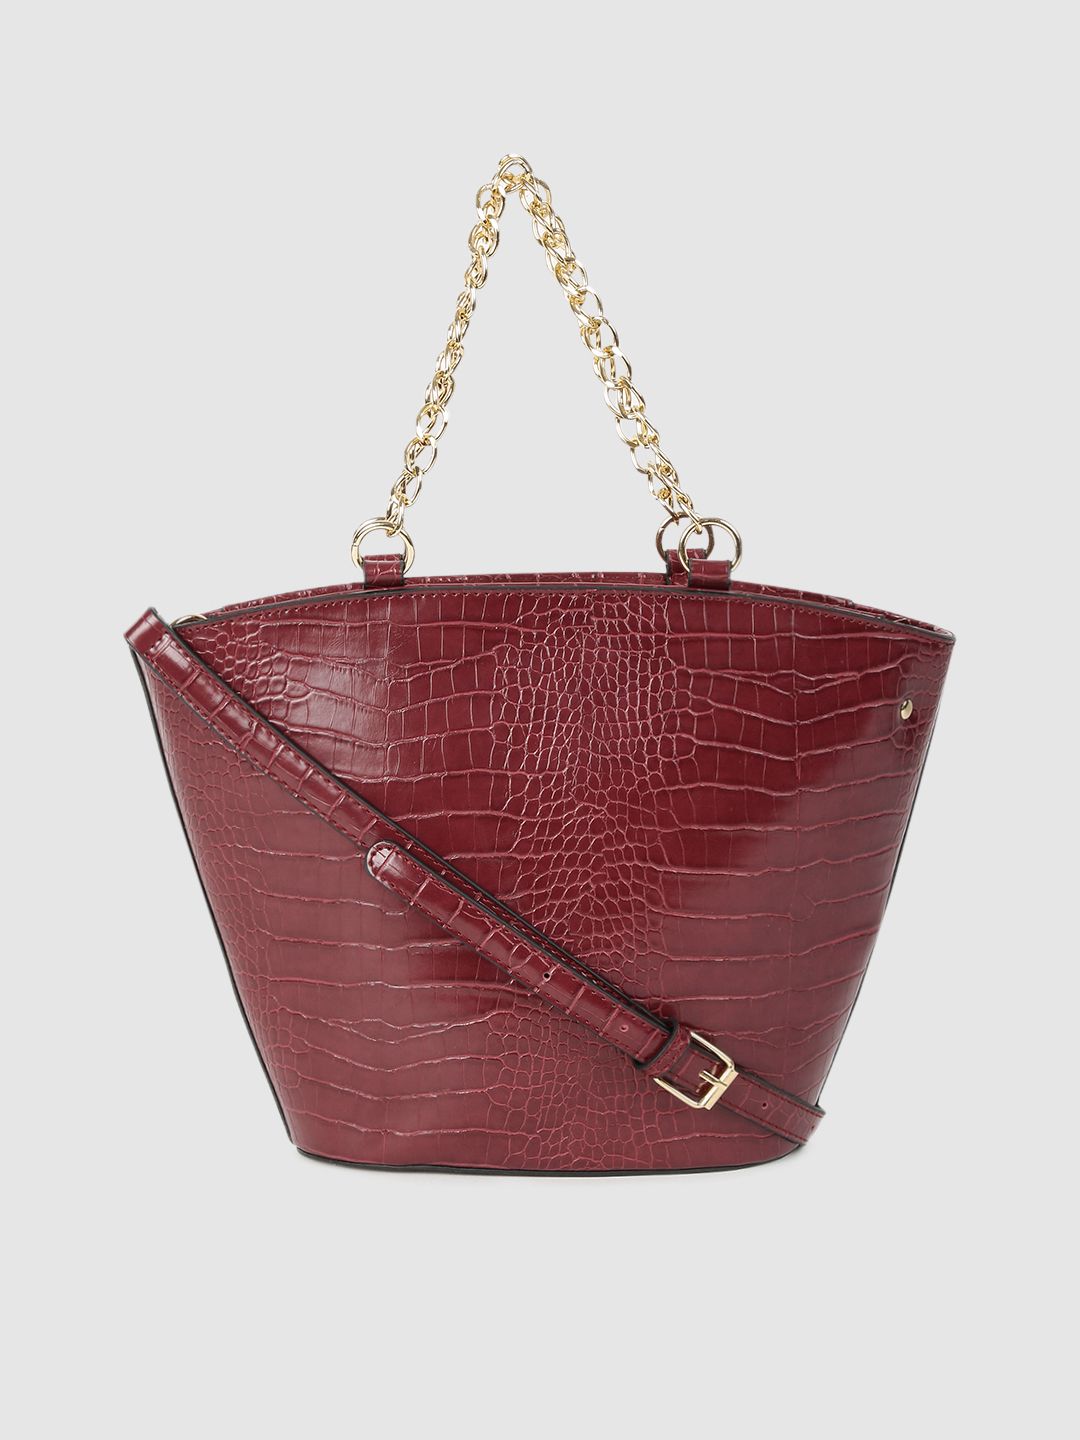 DressBerry Burgundy Animal Textured Oversized Structured Handheld Bag Price in India